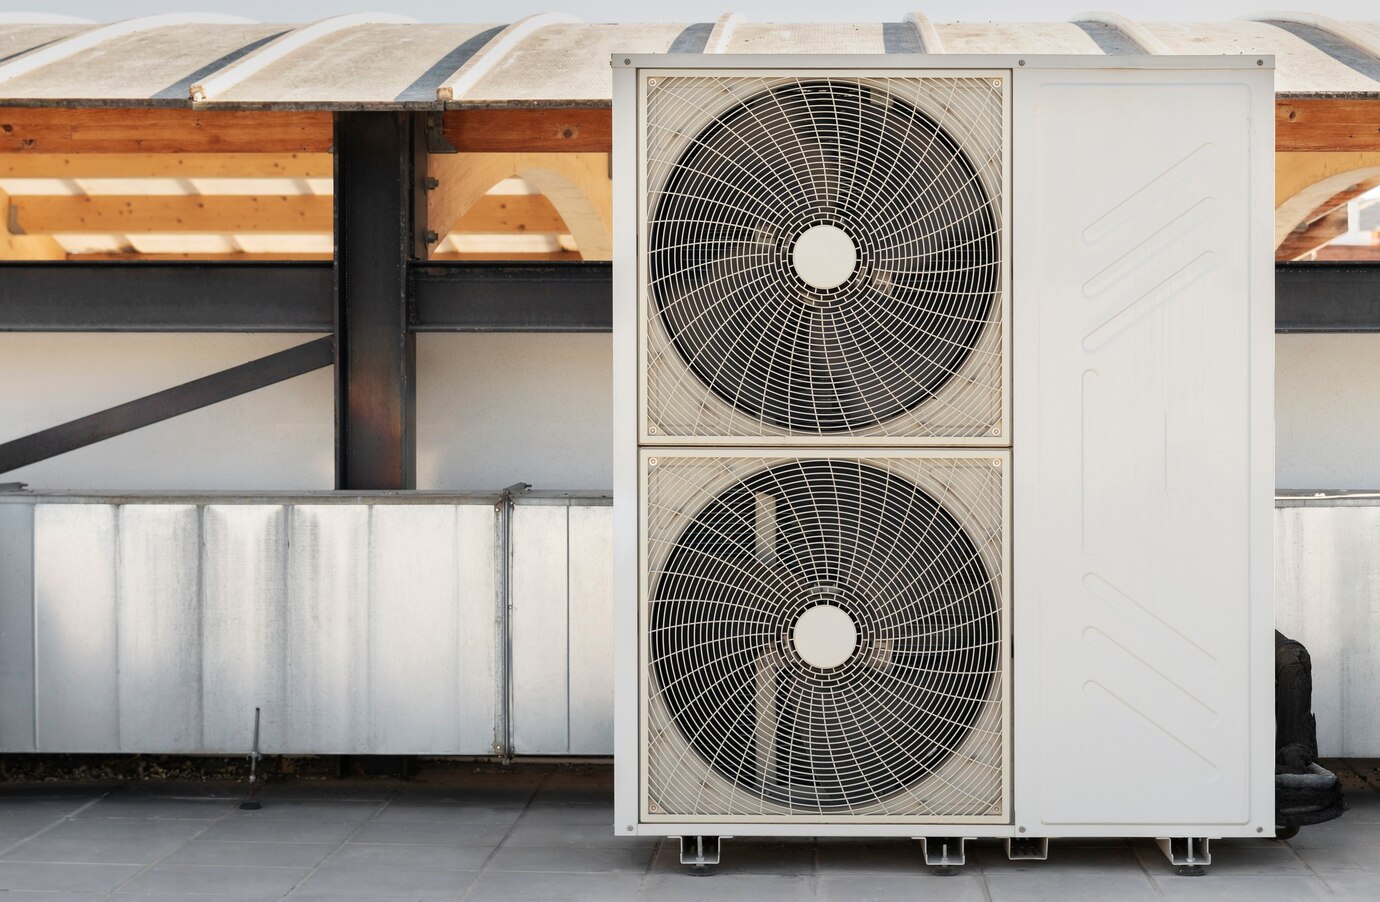 Experience Maximum Comfort with Ductless HVAC Systems